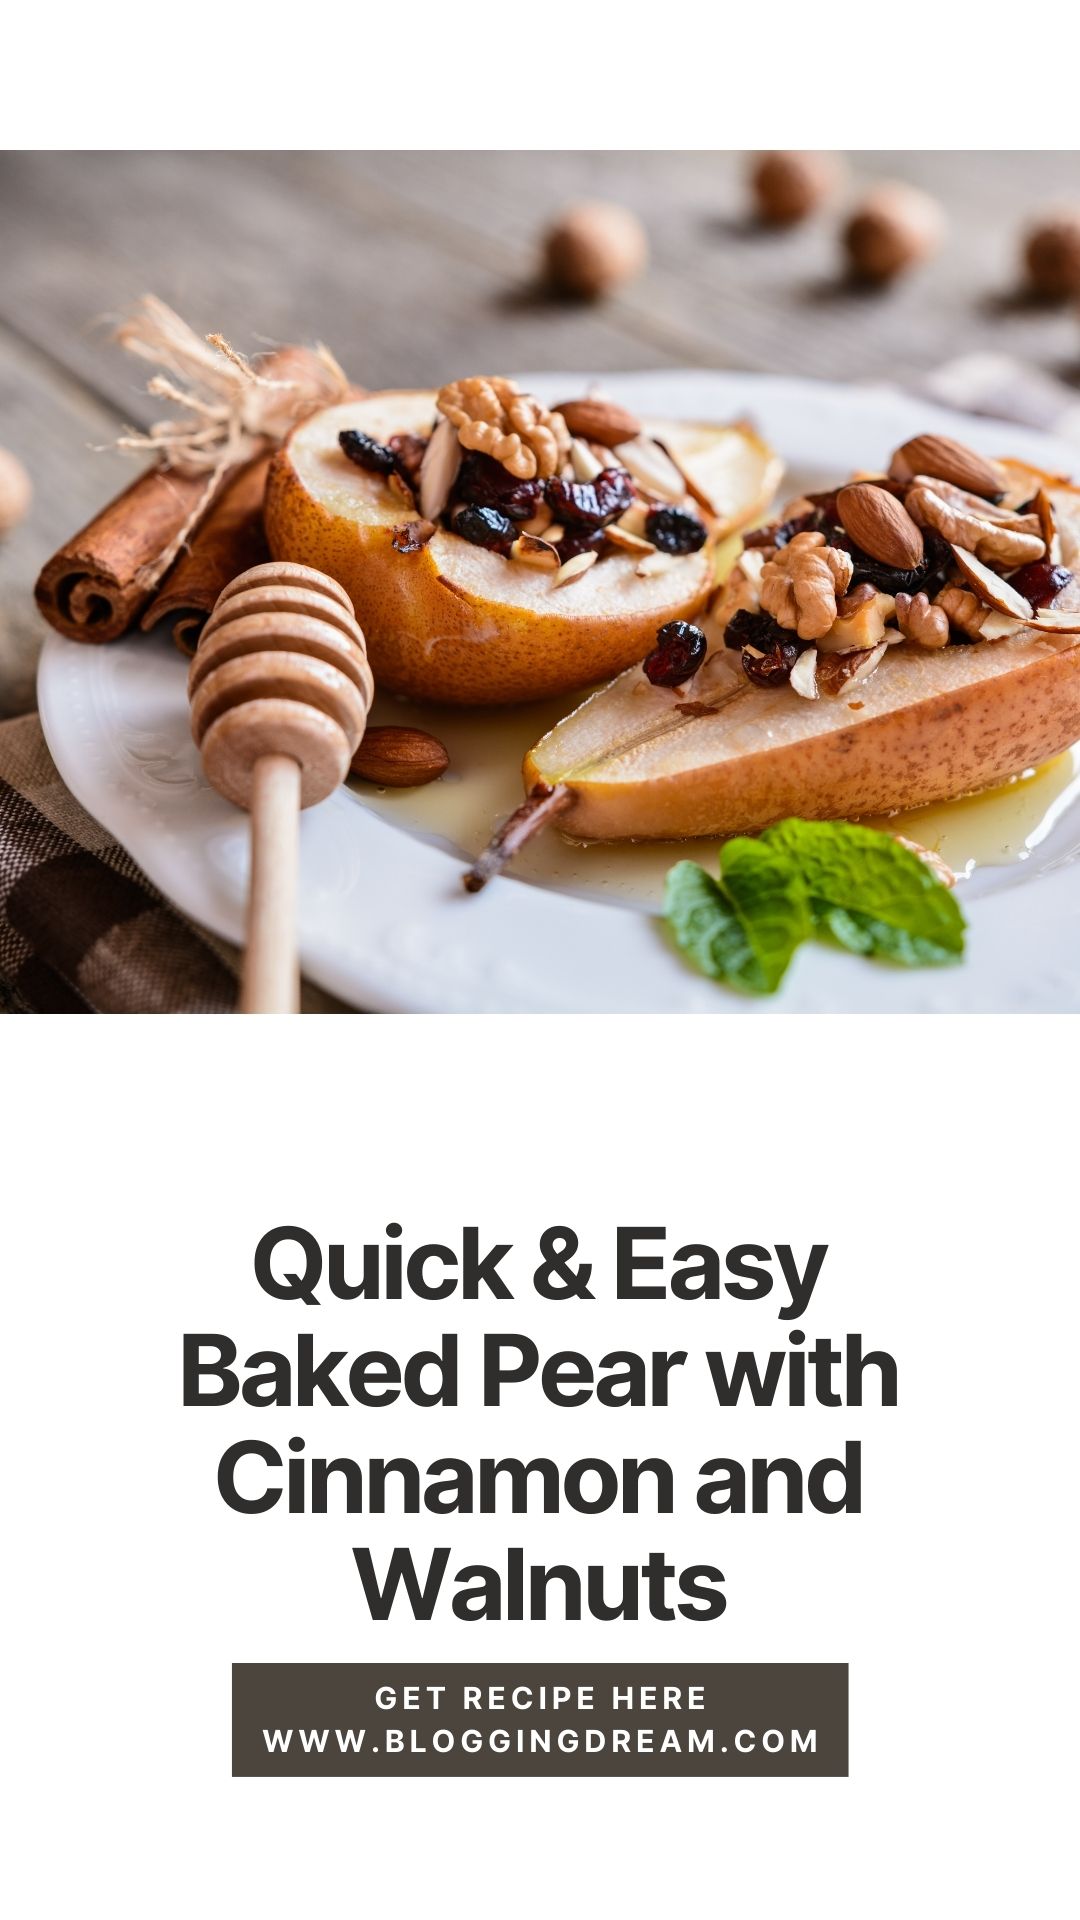 Baked Pear with Cinnamon and Walnuts